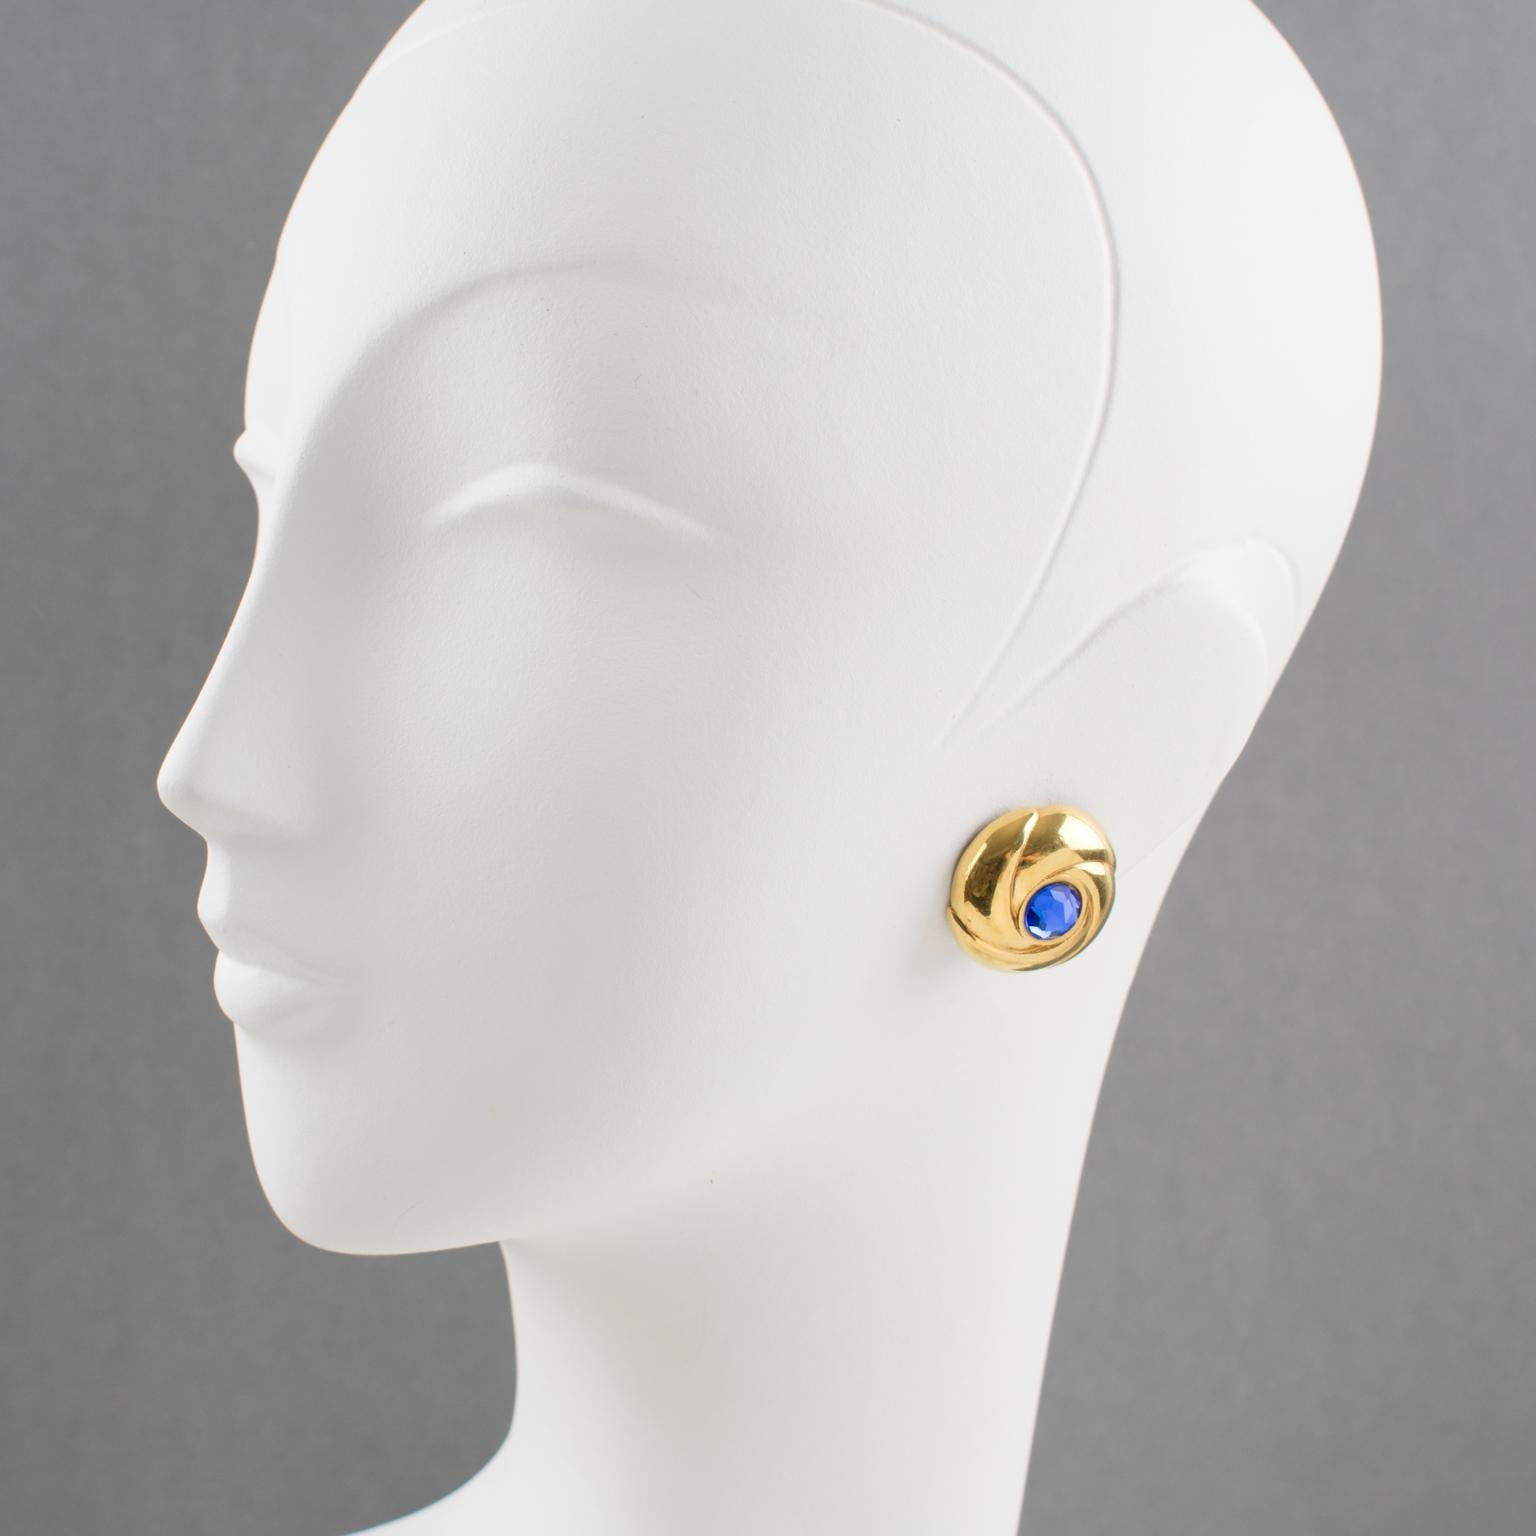 Elegant Courreges Paris clip-on earrings. Dimensional gilt metal round shape, metal all textured and carved, compliment with cobalt blue crystal rhinestone. Signed underside with Courreges Brand logo. 
Measurements: 1 in. diameter (2.5 cm)